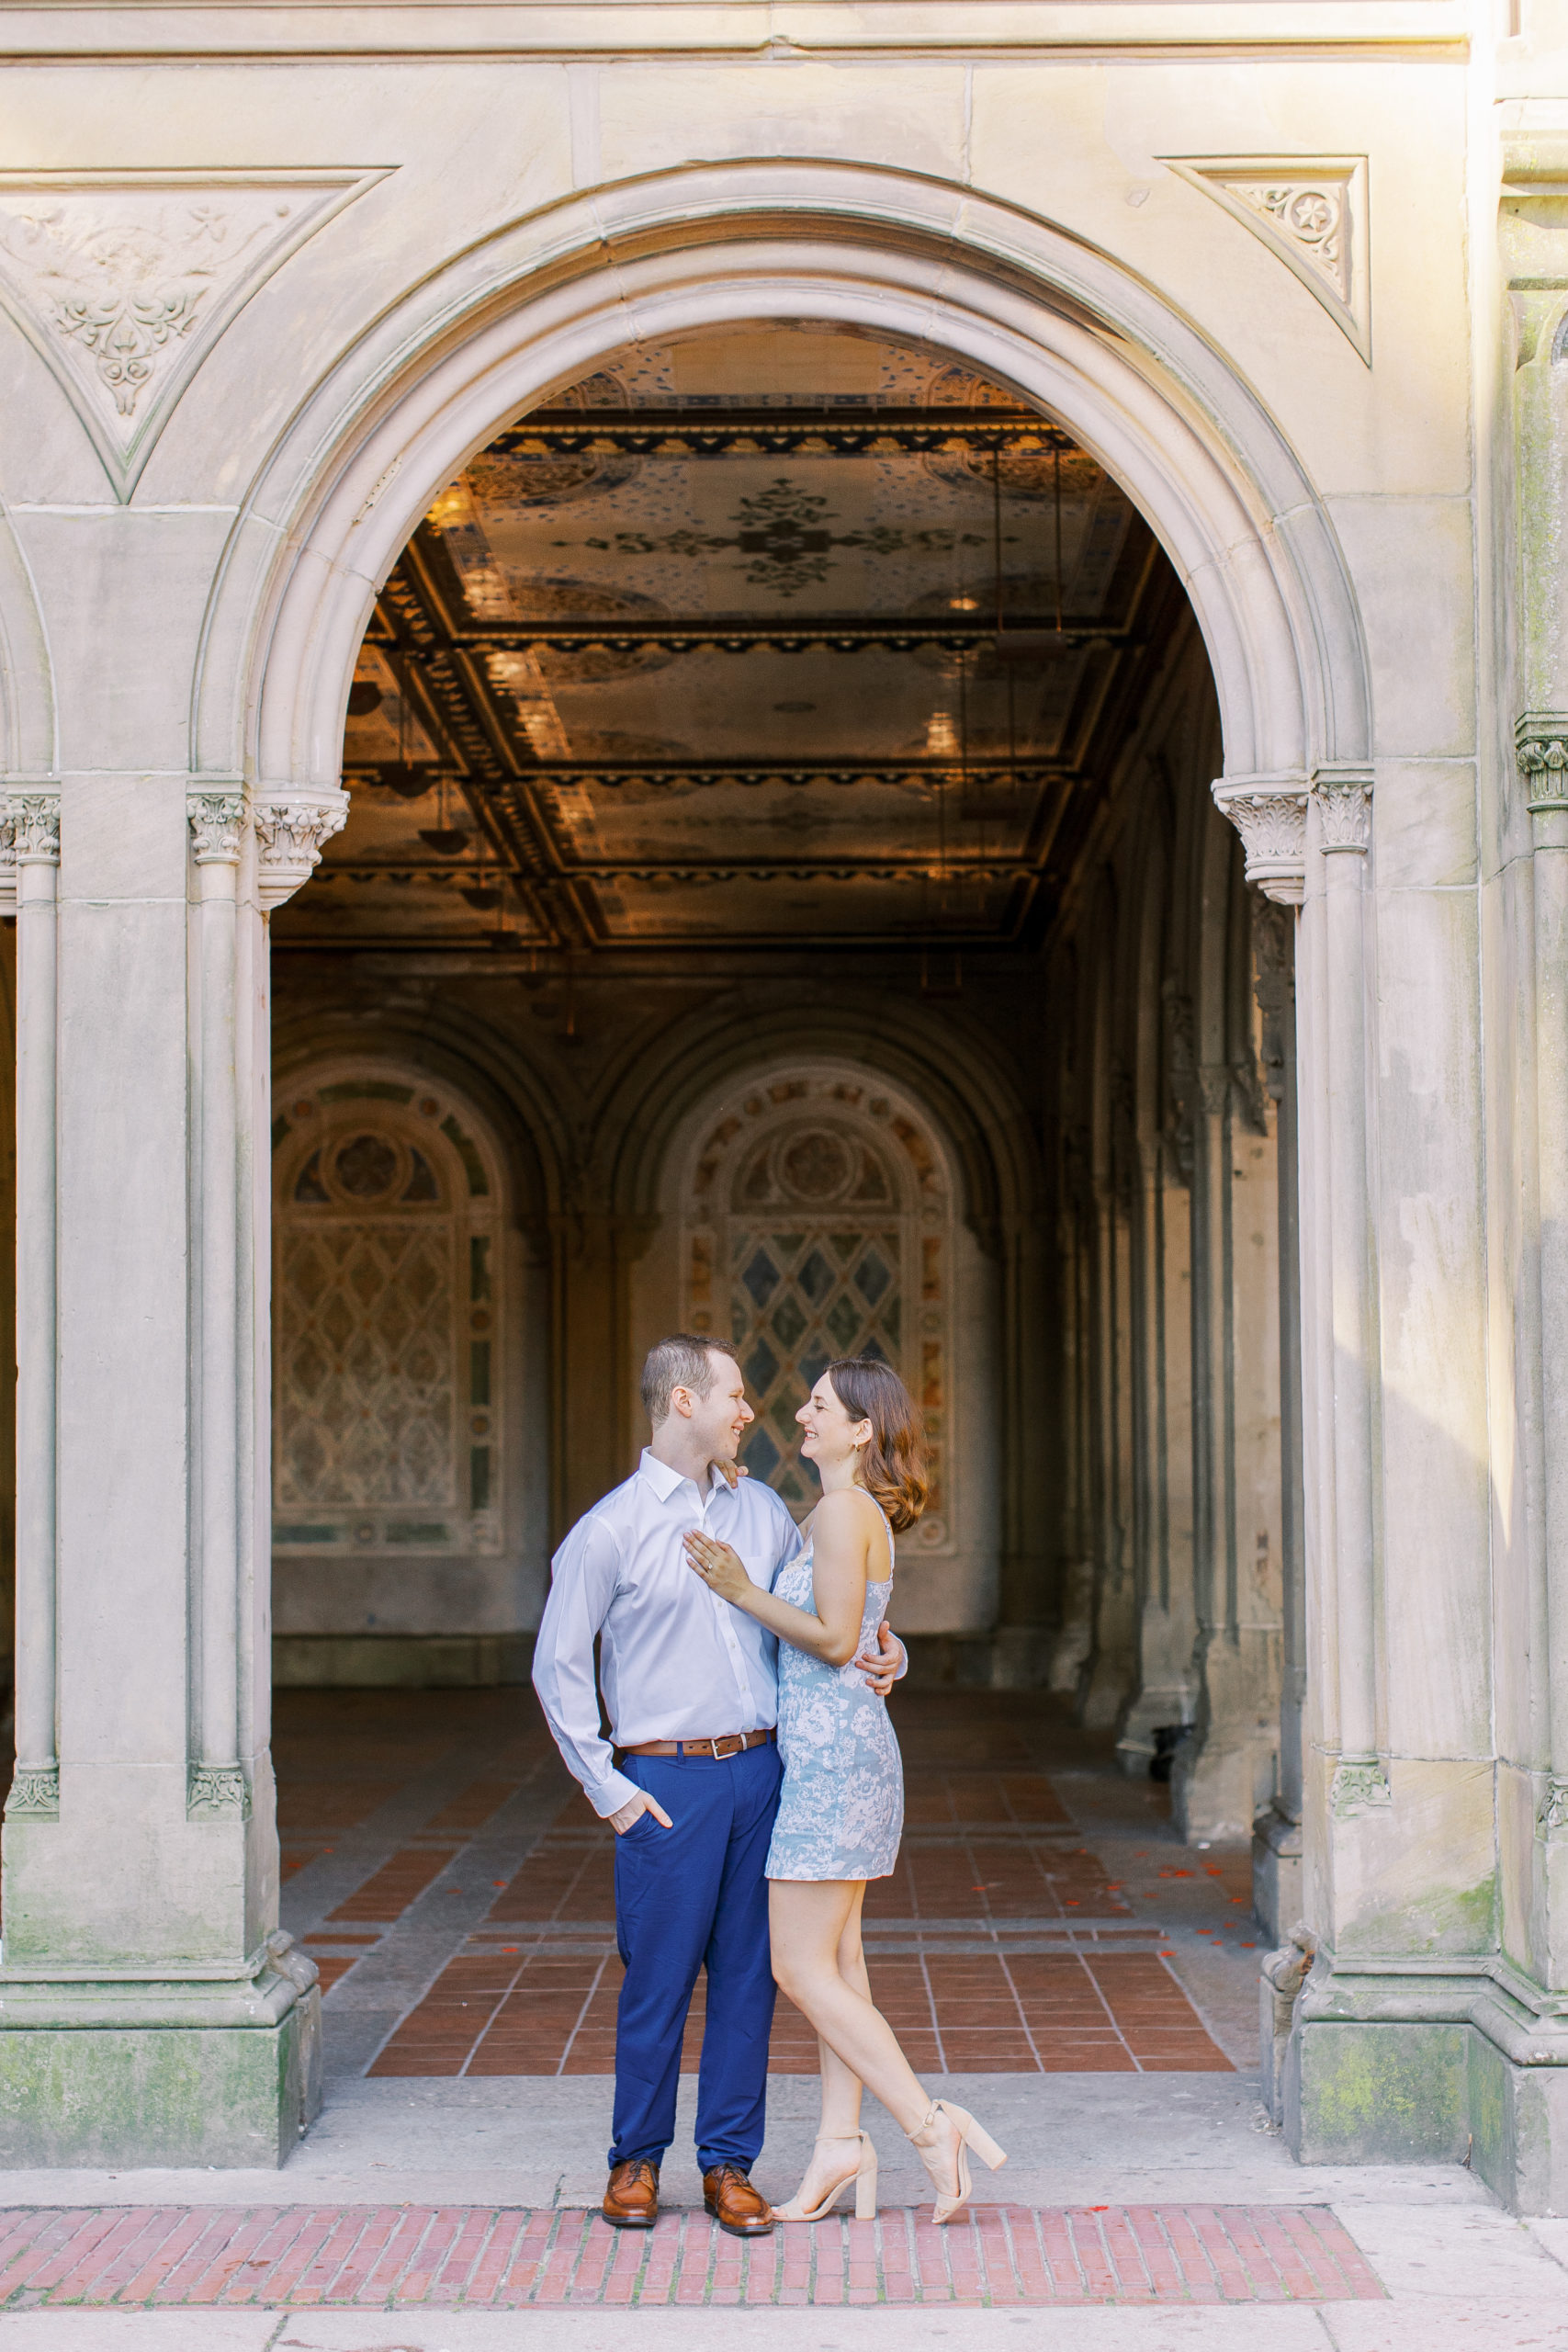 Couple embrace and smile in front of terrace archway with colorful tiles 